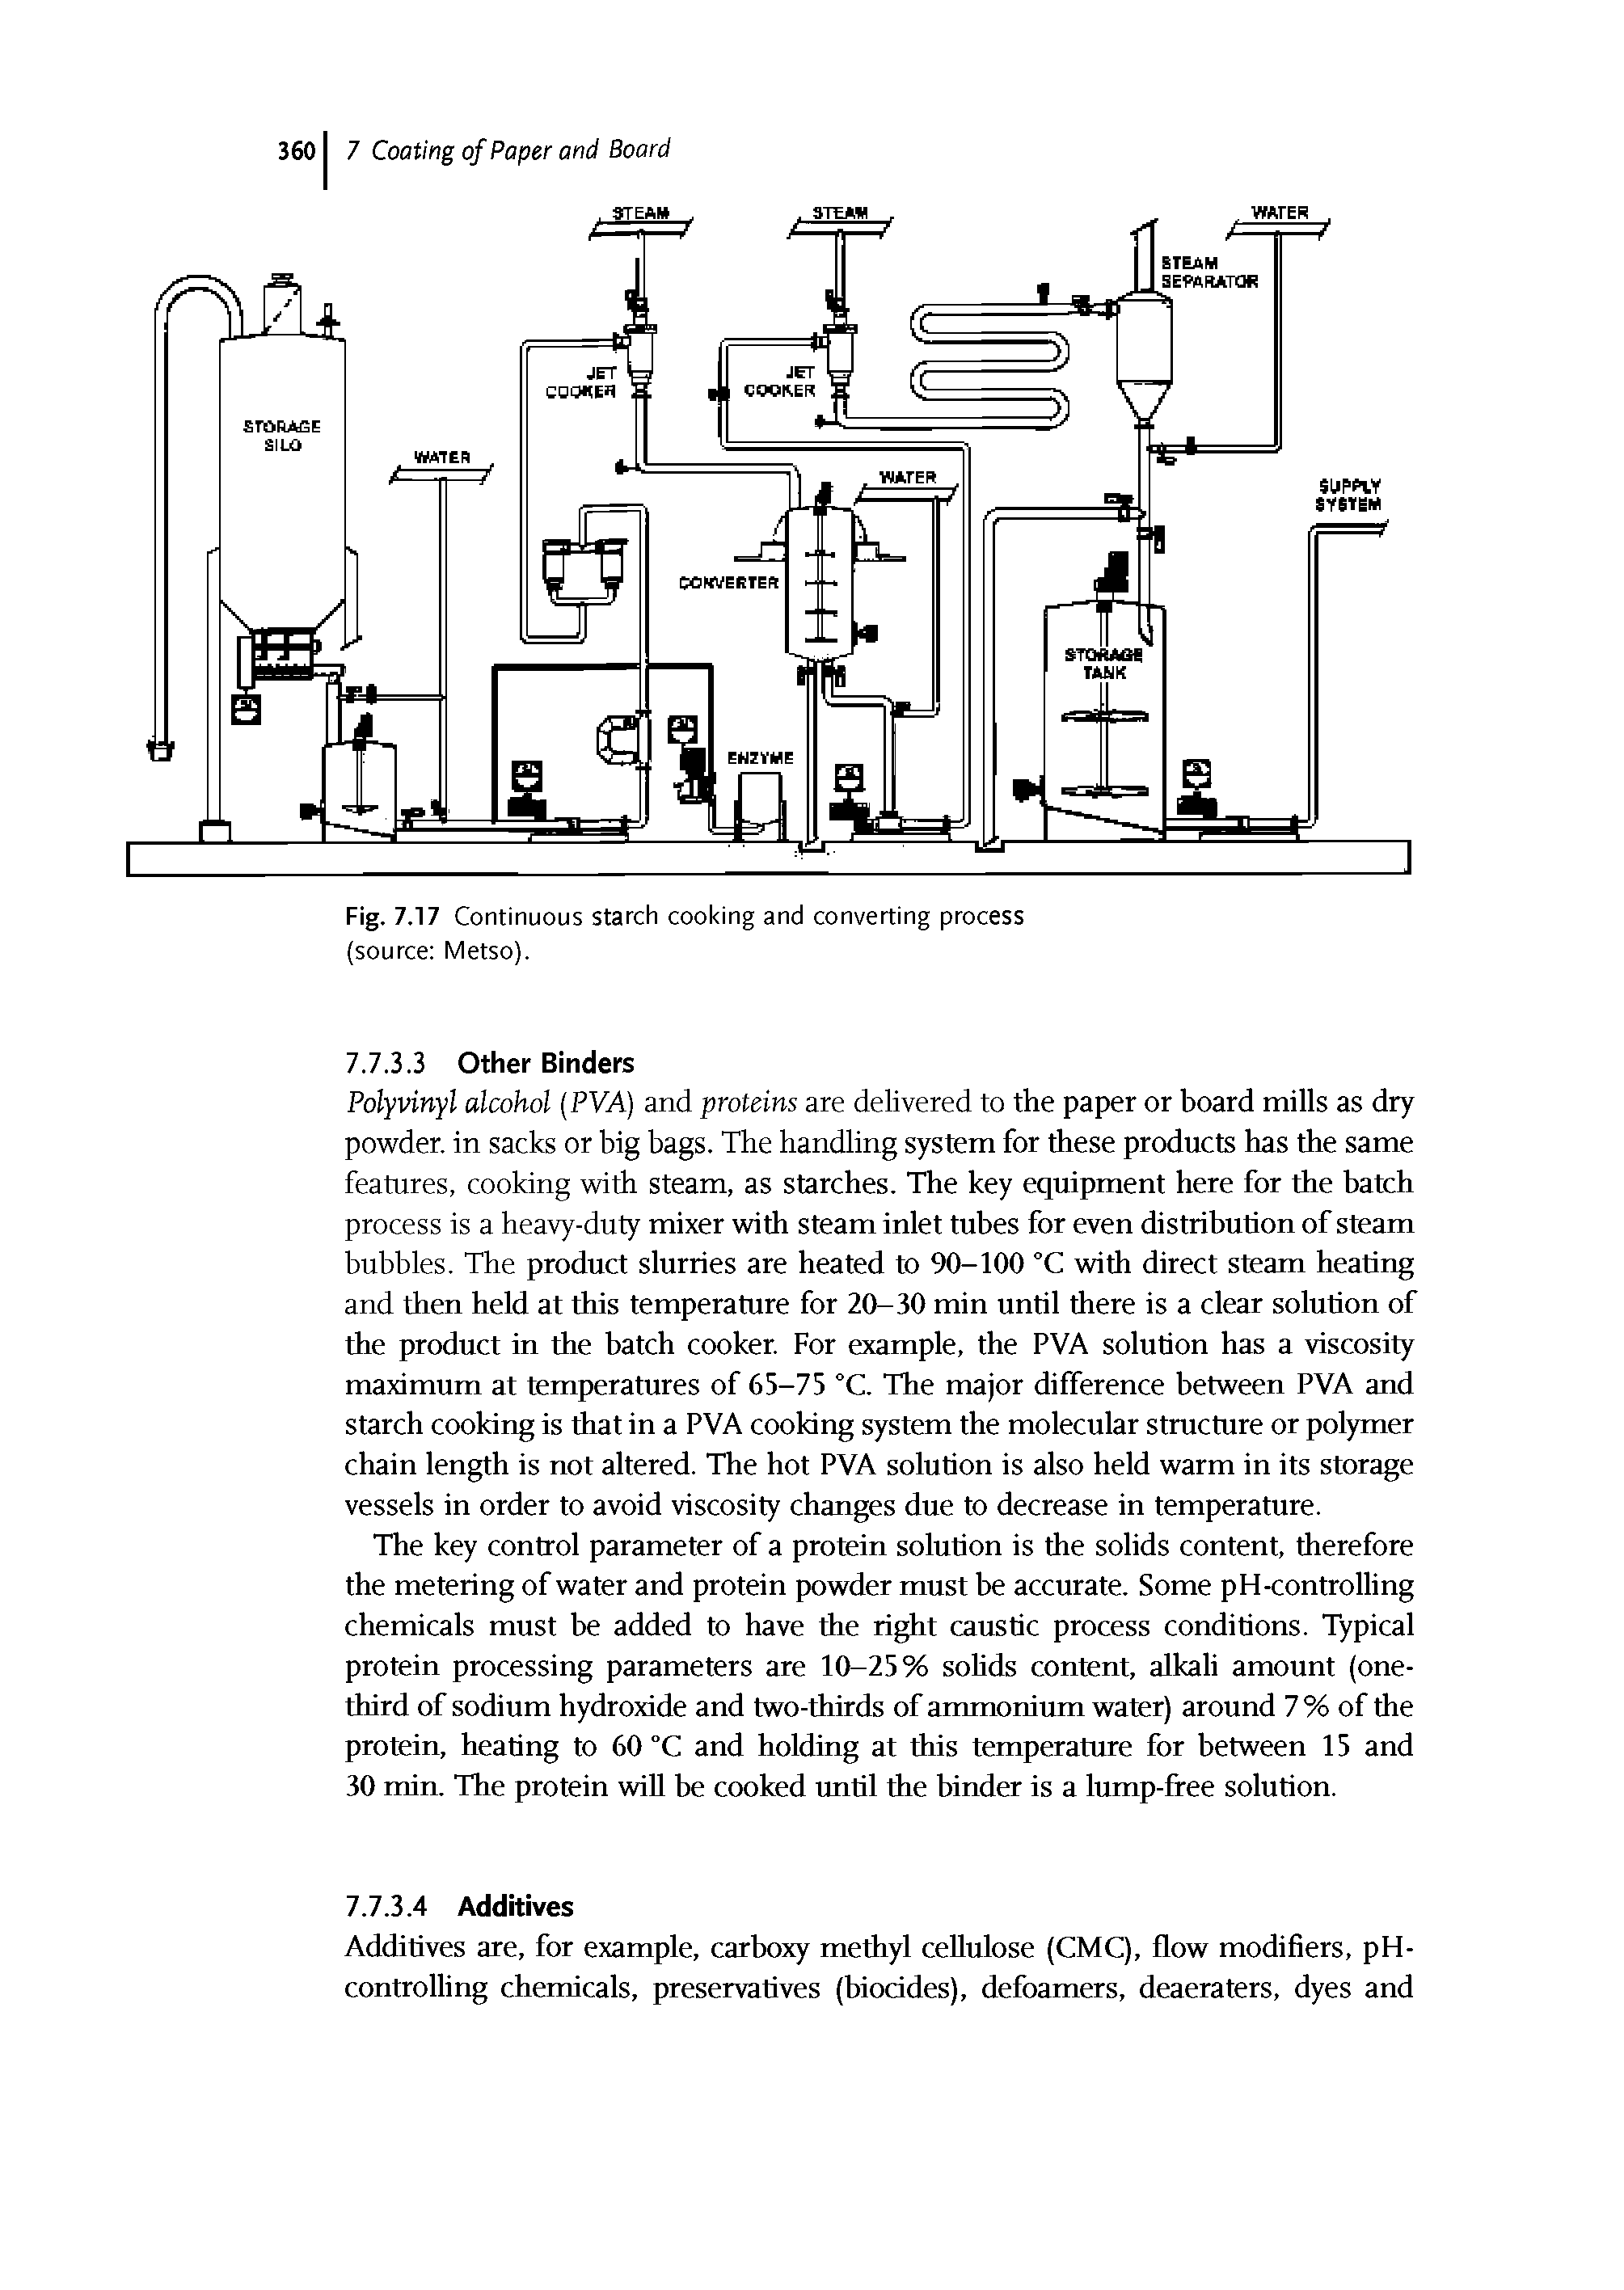 Fig. 7.17 Continuous starch cooking and converting process (source Metso).